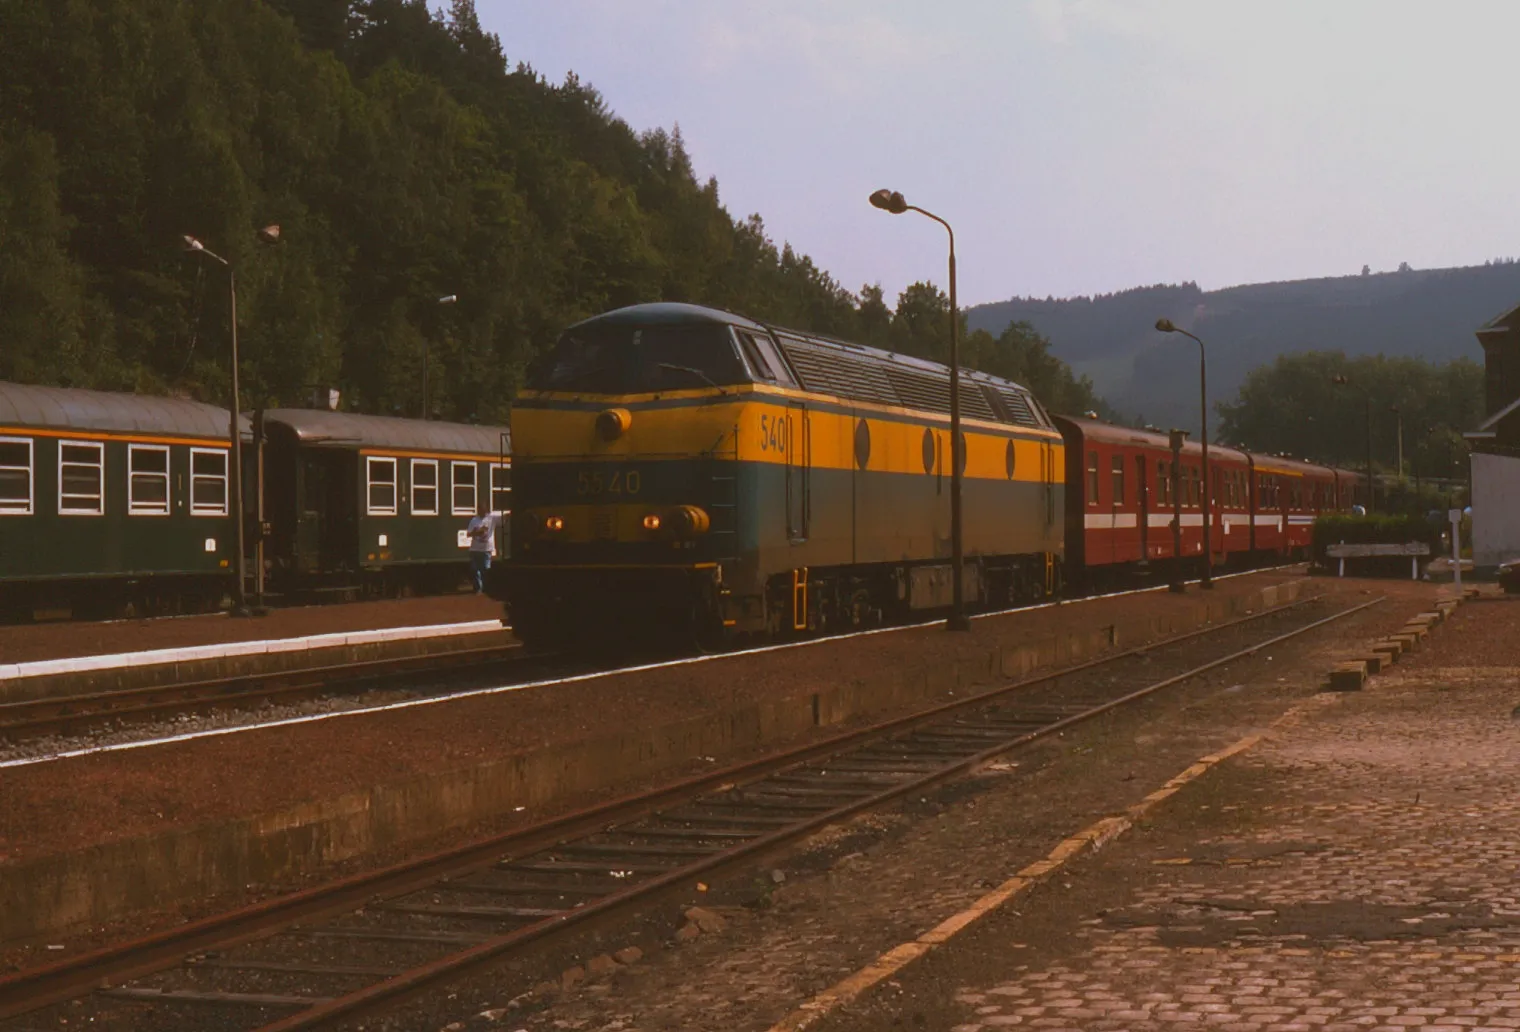 Photo showing: Belgian Railways class 55 no. 5540 on one of its common workings - InterRegional trains on the Liège to Luxembourg line prior to electrification. Seen at Trois Ponts in Belgium on 19 August 1995 is 5540 on train IR116, 14:10 Luxembourg to Liège-Guillemins.